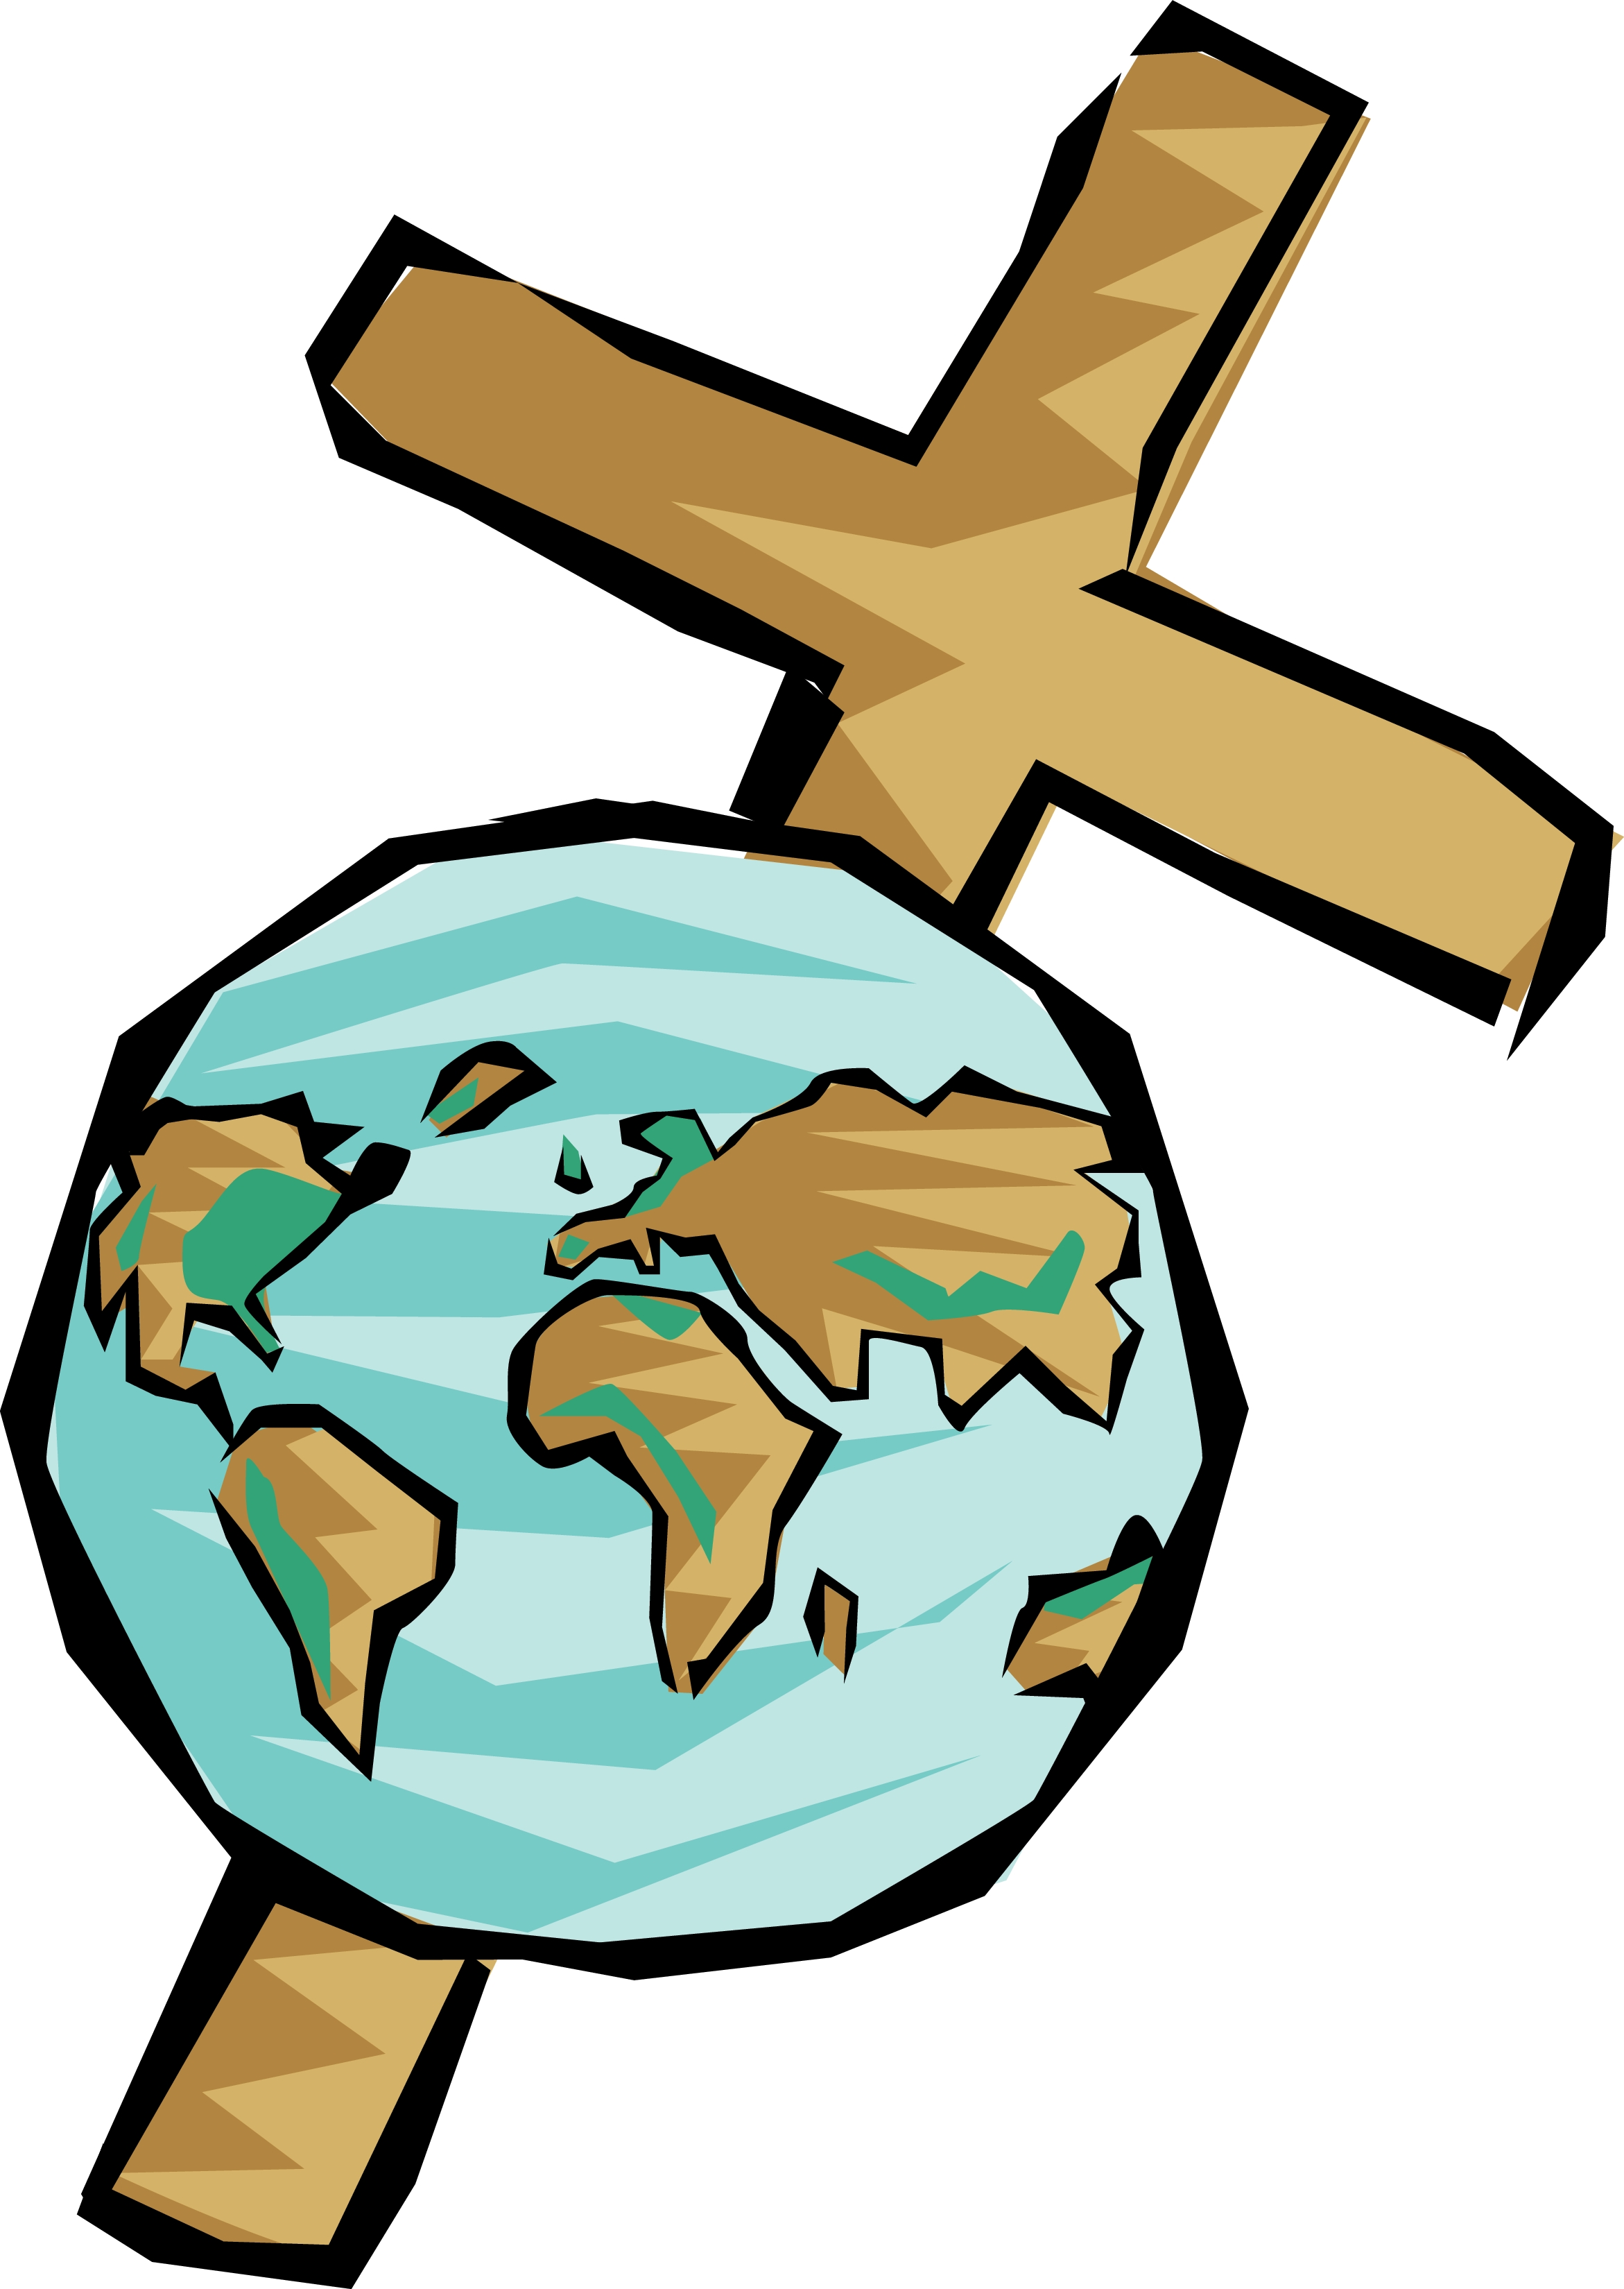 Clipart of God and world free image download